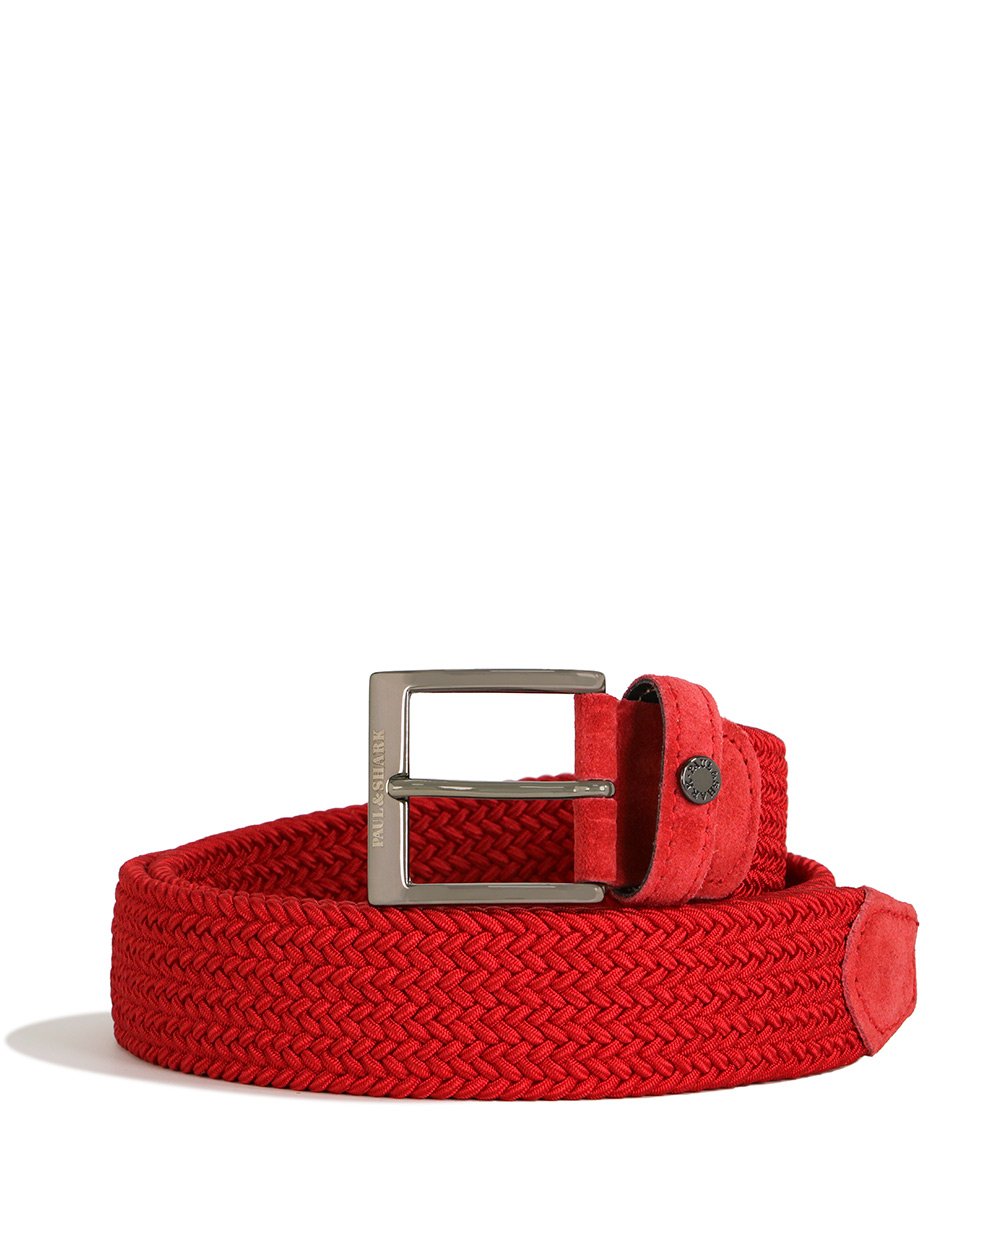 Fabric Belt - ISSI Outlet